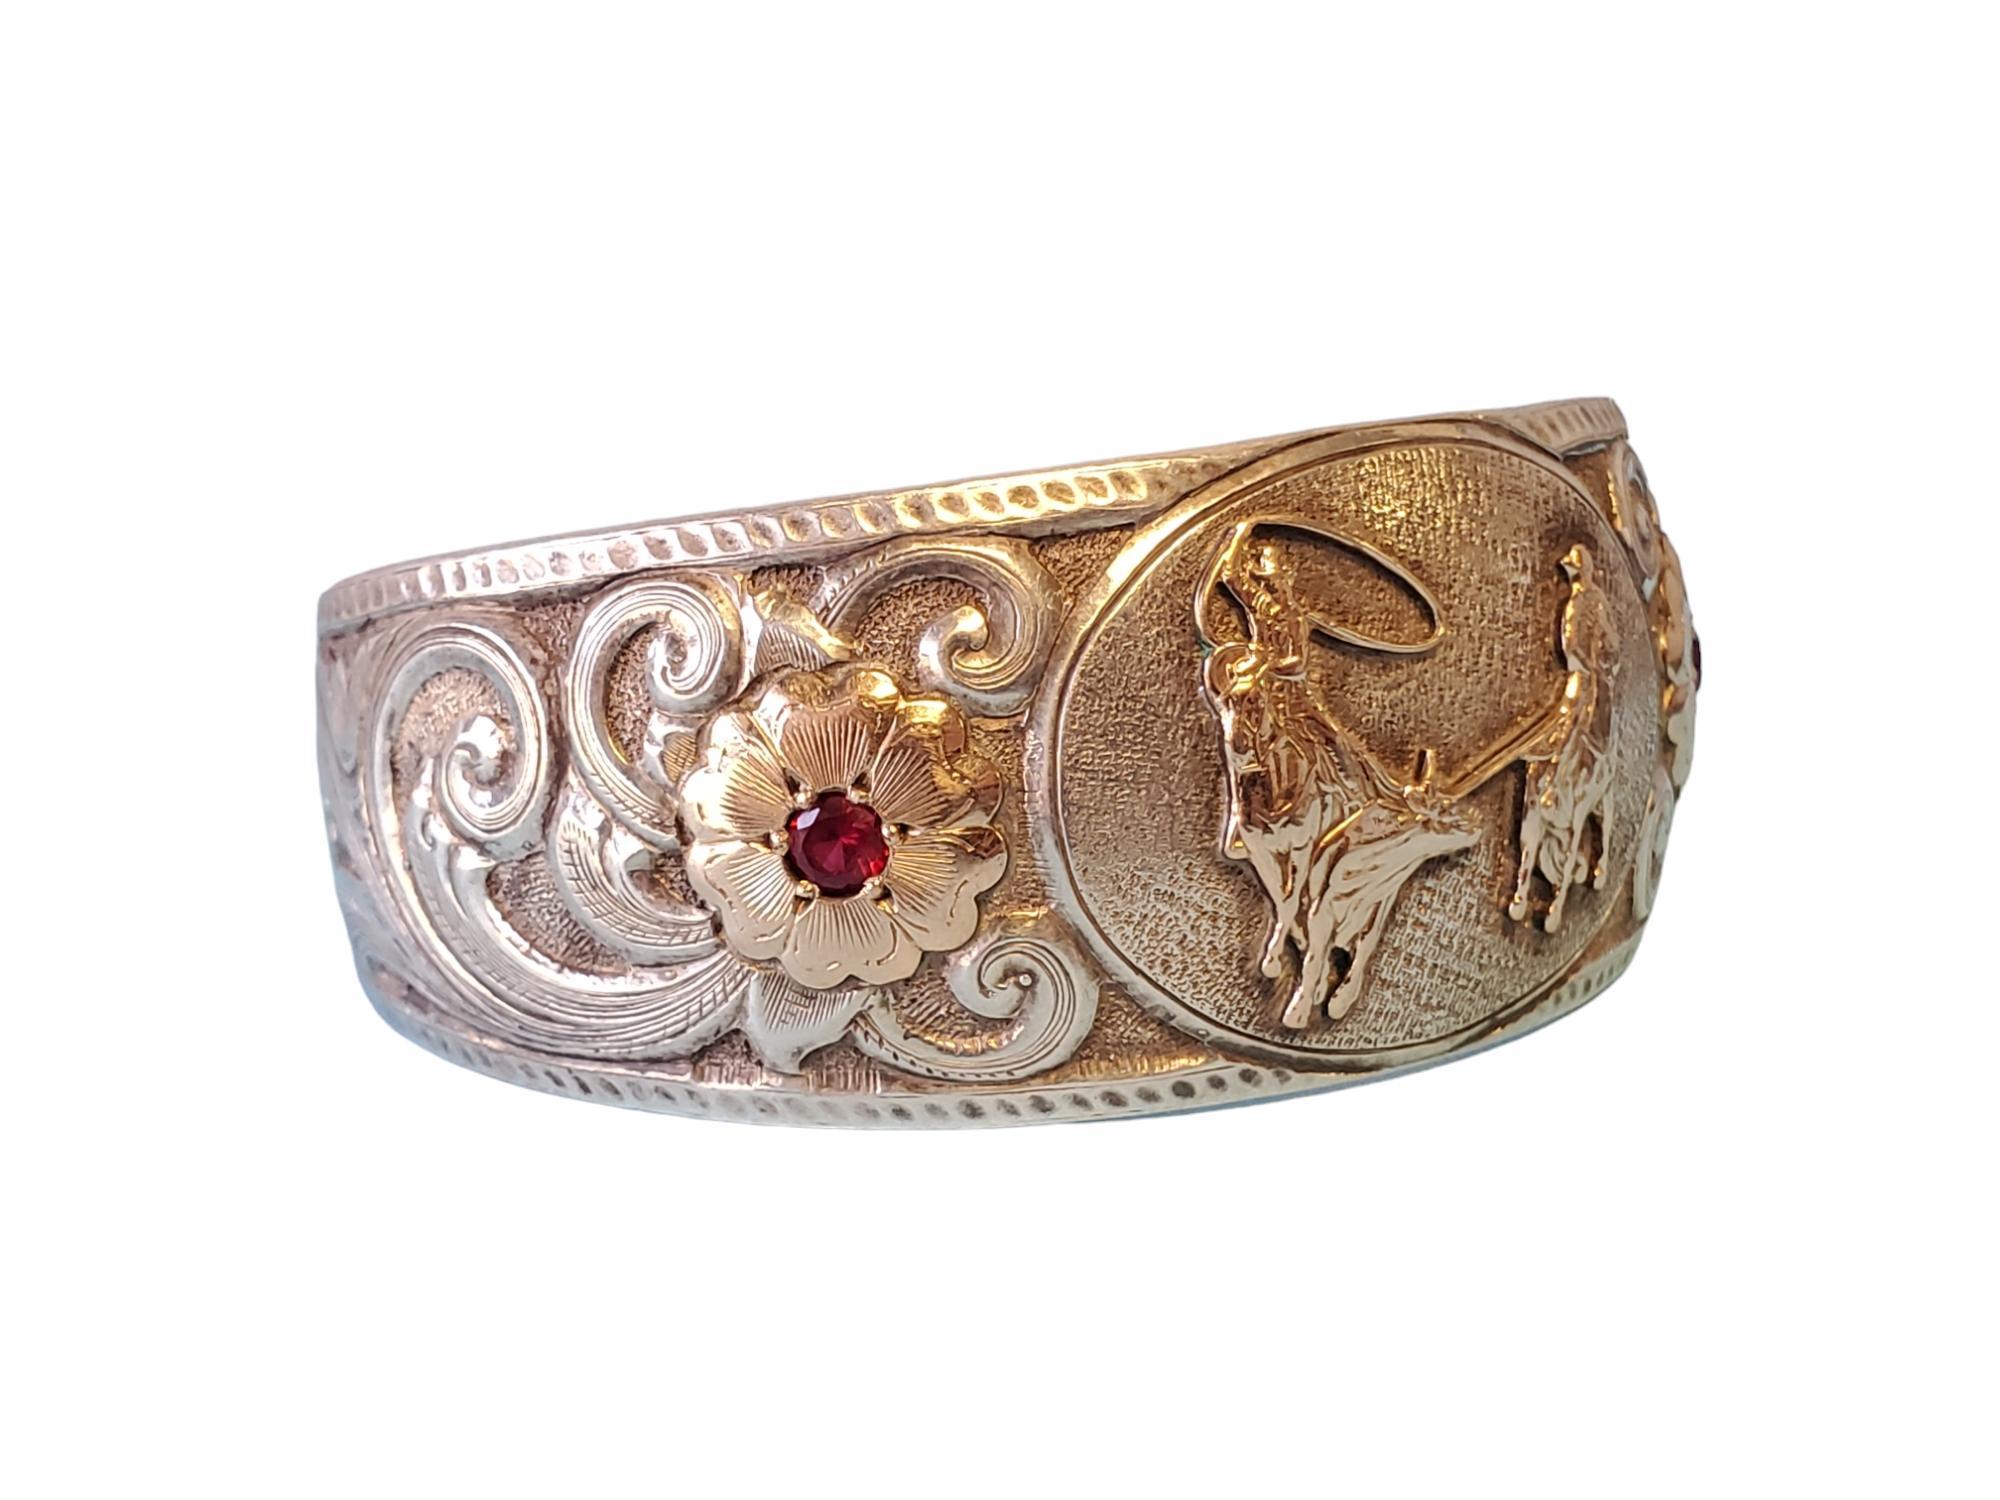 Vintage Gist Signed Sterling Cuff Bracelet with Cowboy Motif

Listed is a signed designer Gist sterling cuff bracelet. This wonderful sterling cuff features red stones with gold accented floral patterns and cowboys roping in the center. The cuff